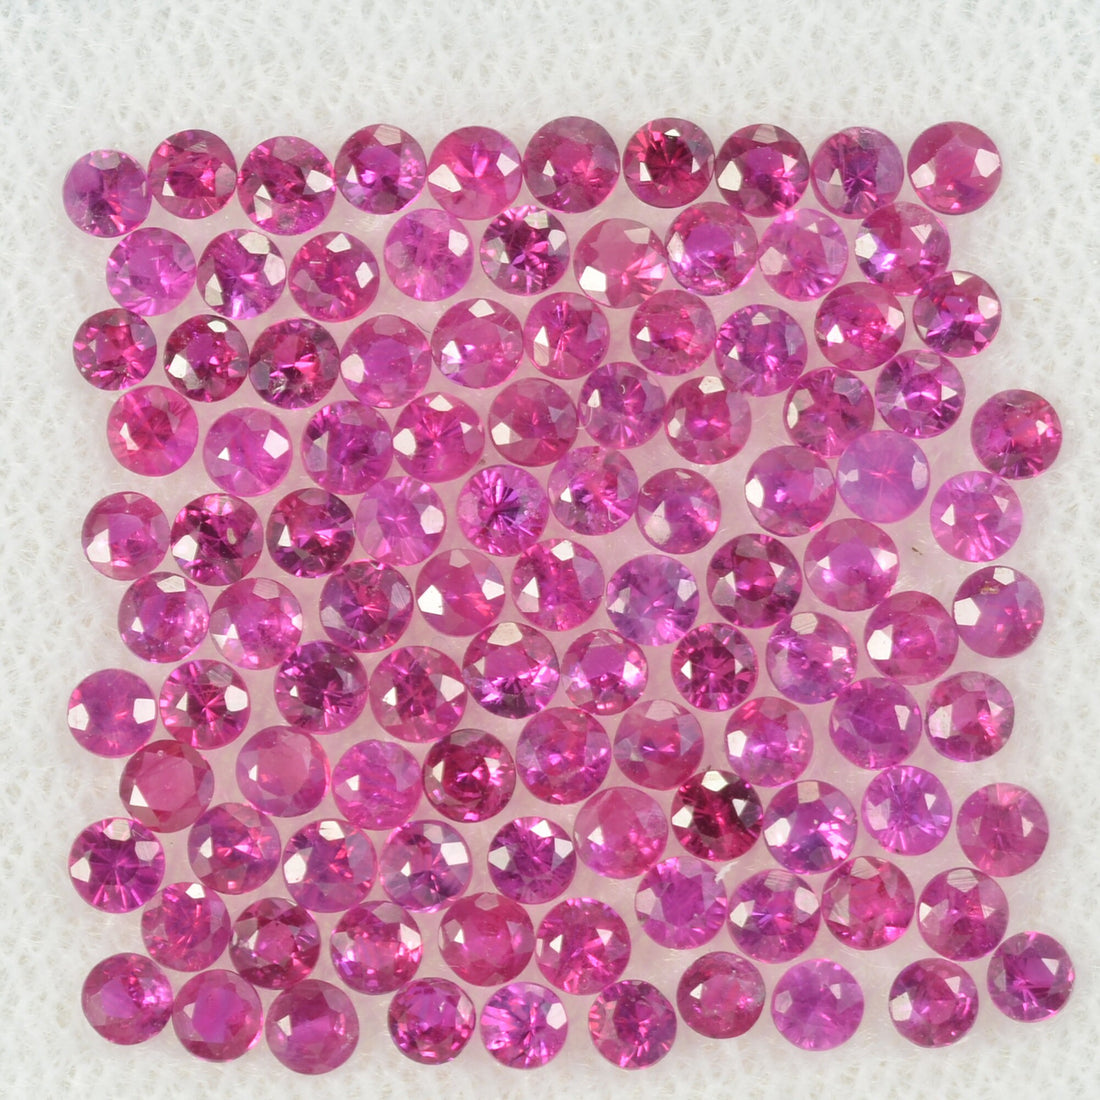 2.0 mm Natural Pink Sapphire Loose Gemstone Round Diamond Cut Vs Quality AAA+ Color